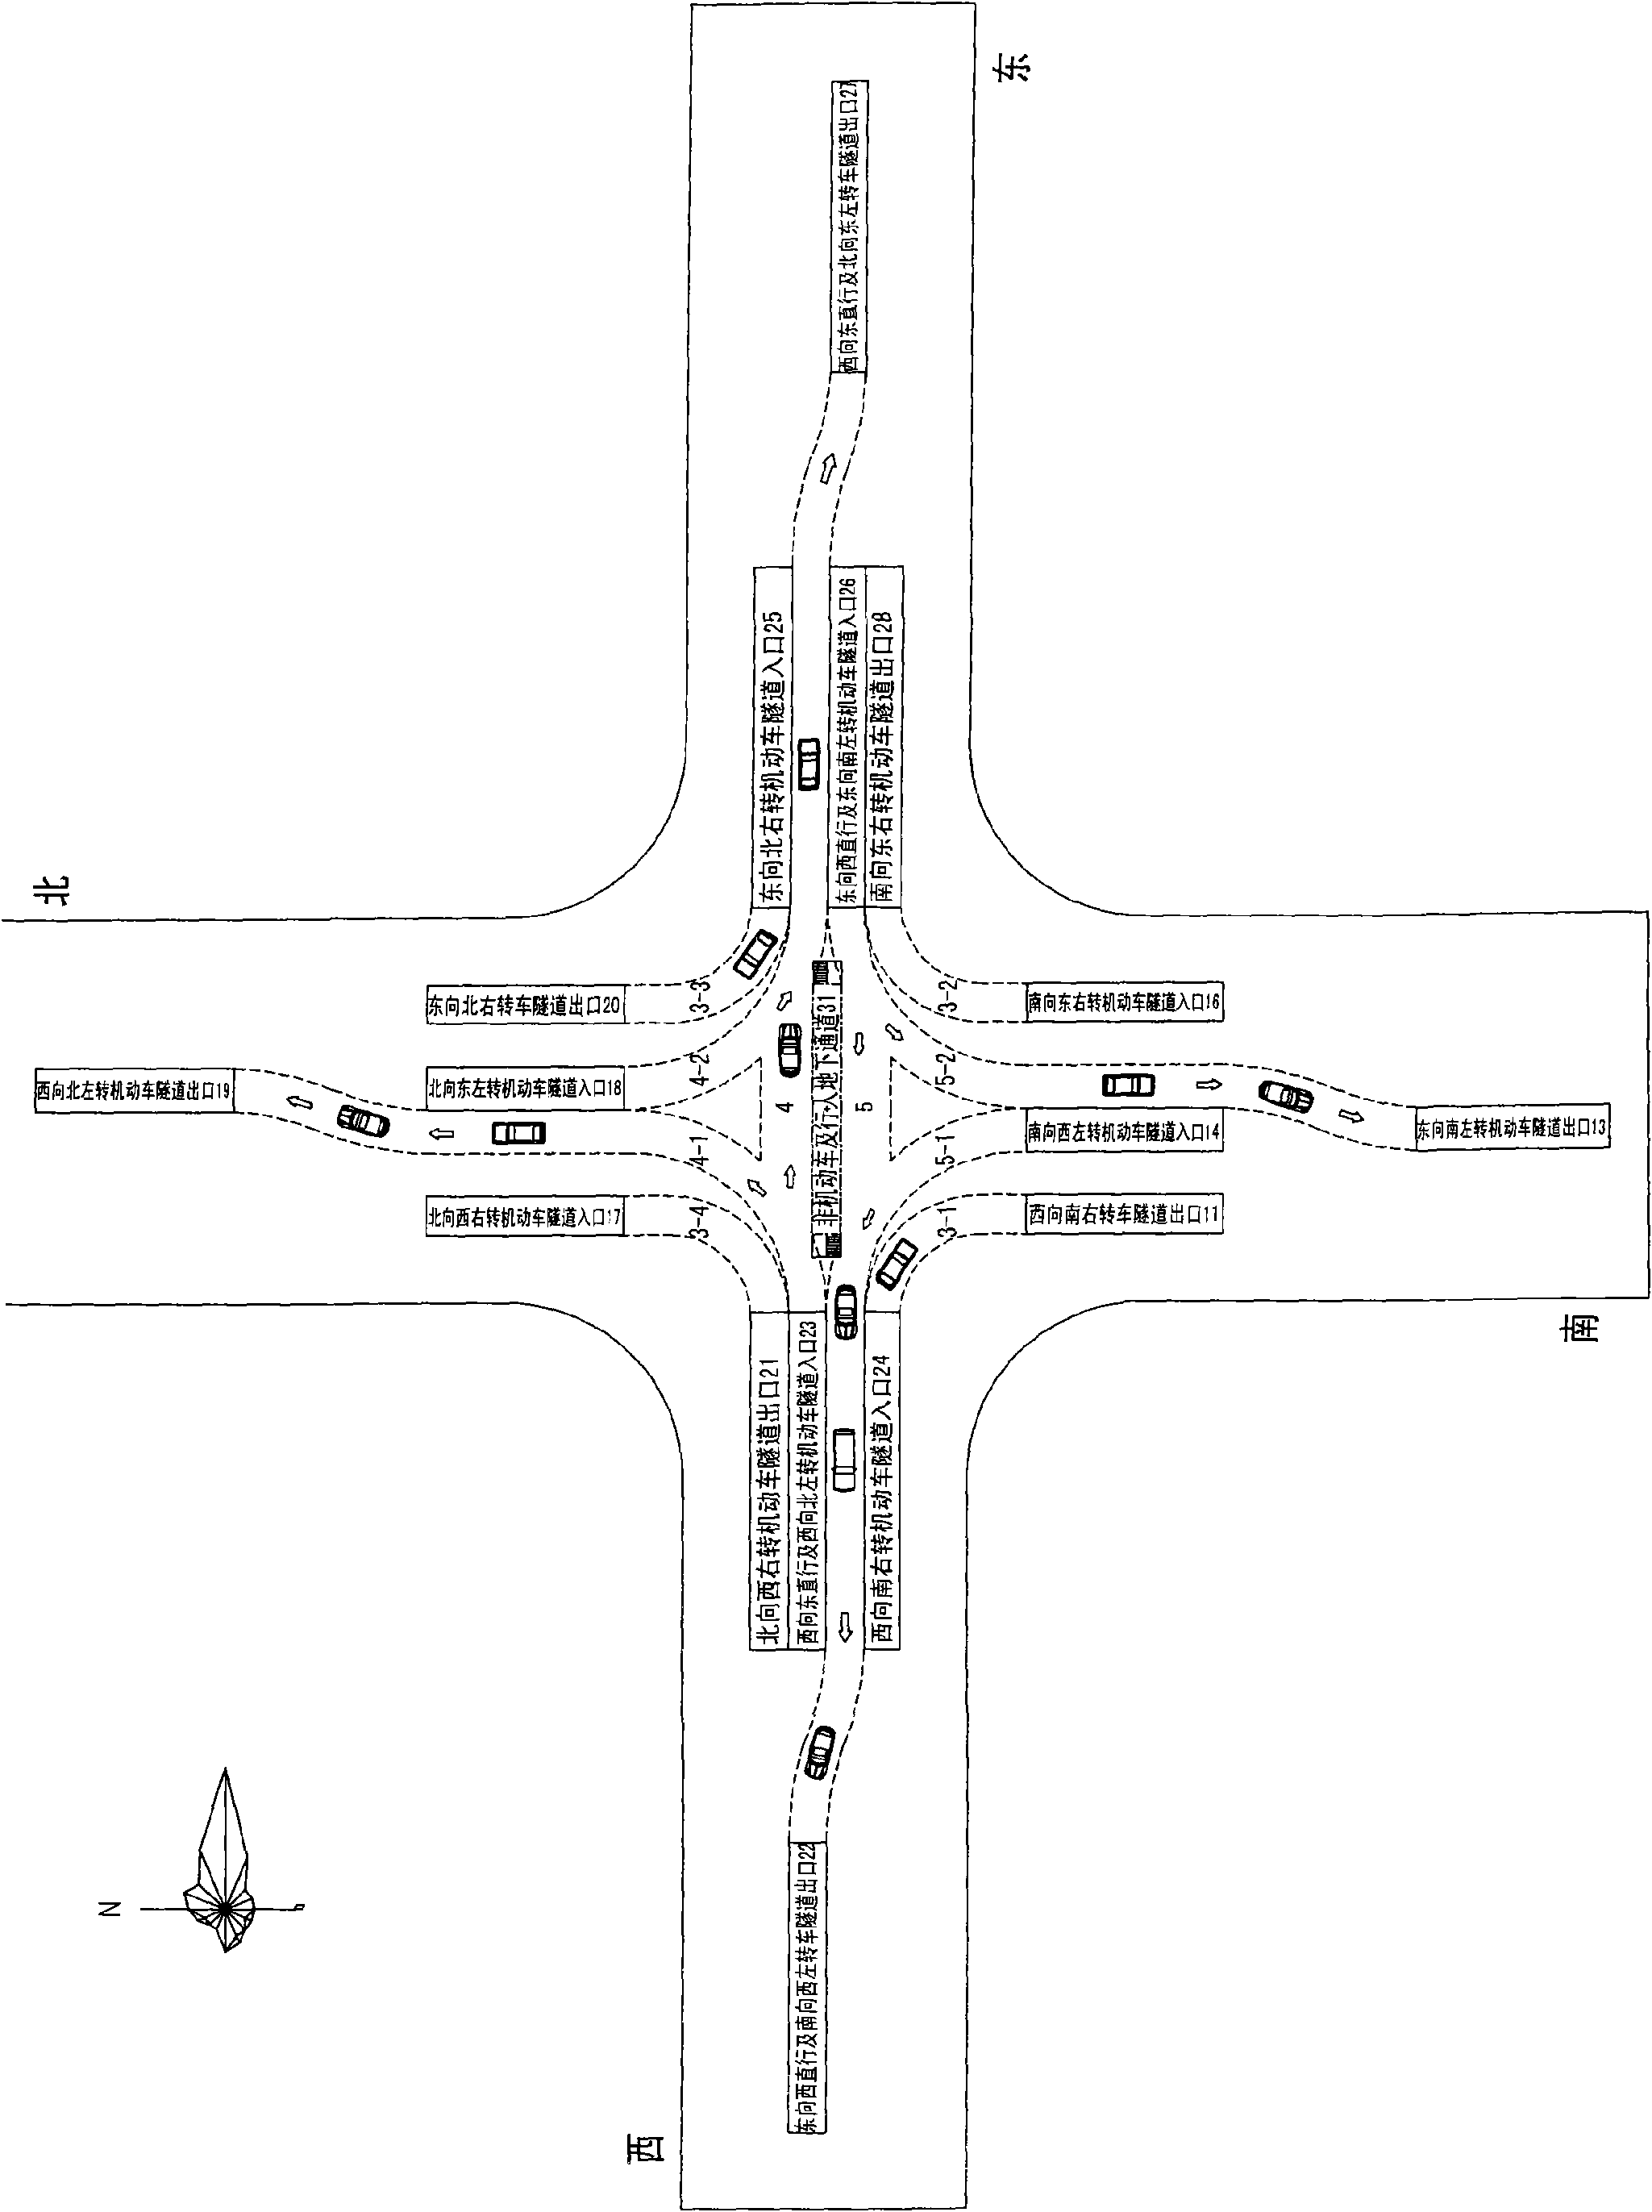 Full-communication and full-orientation three-dimensional traffic system